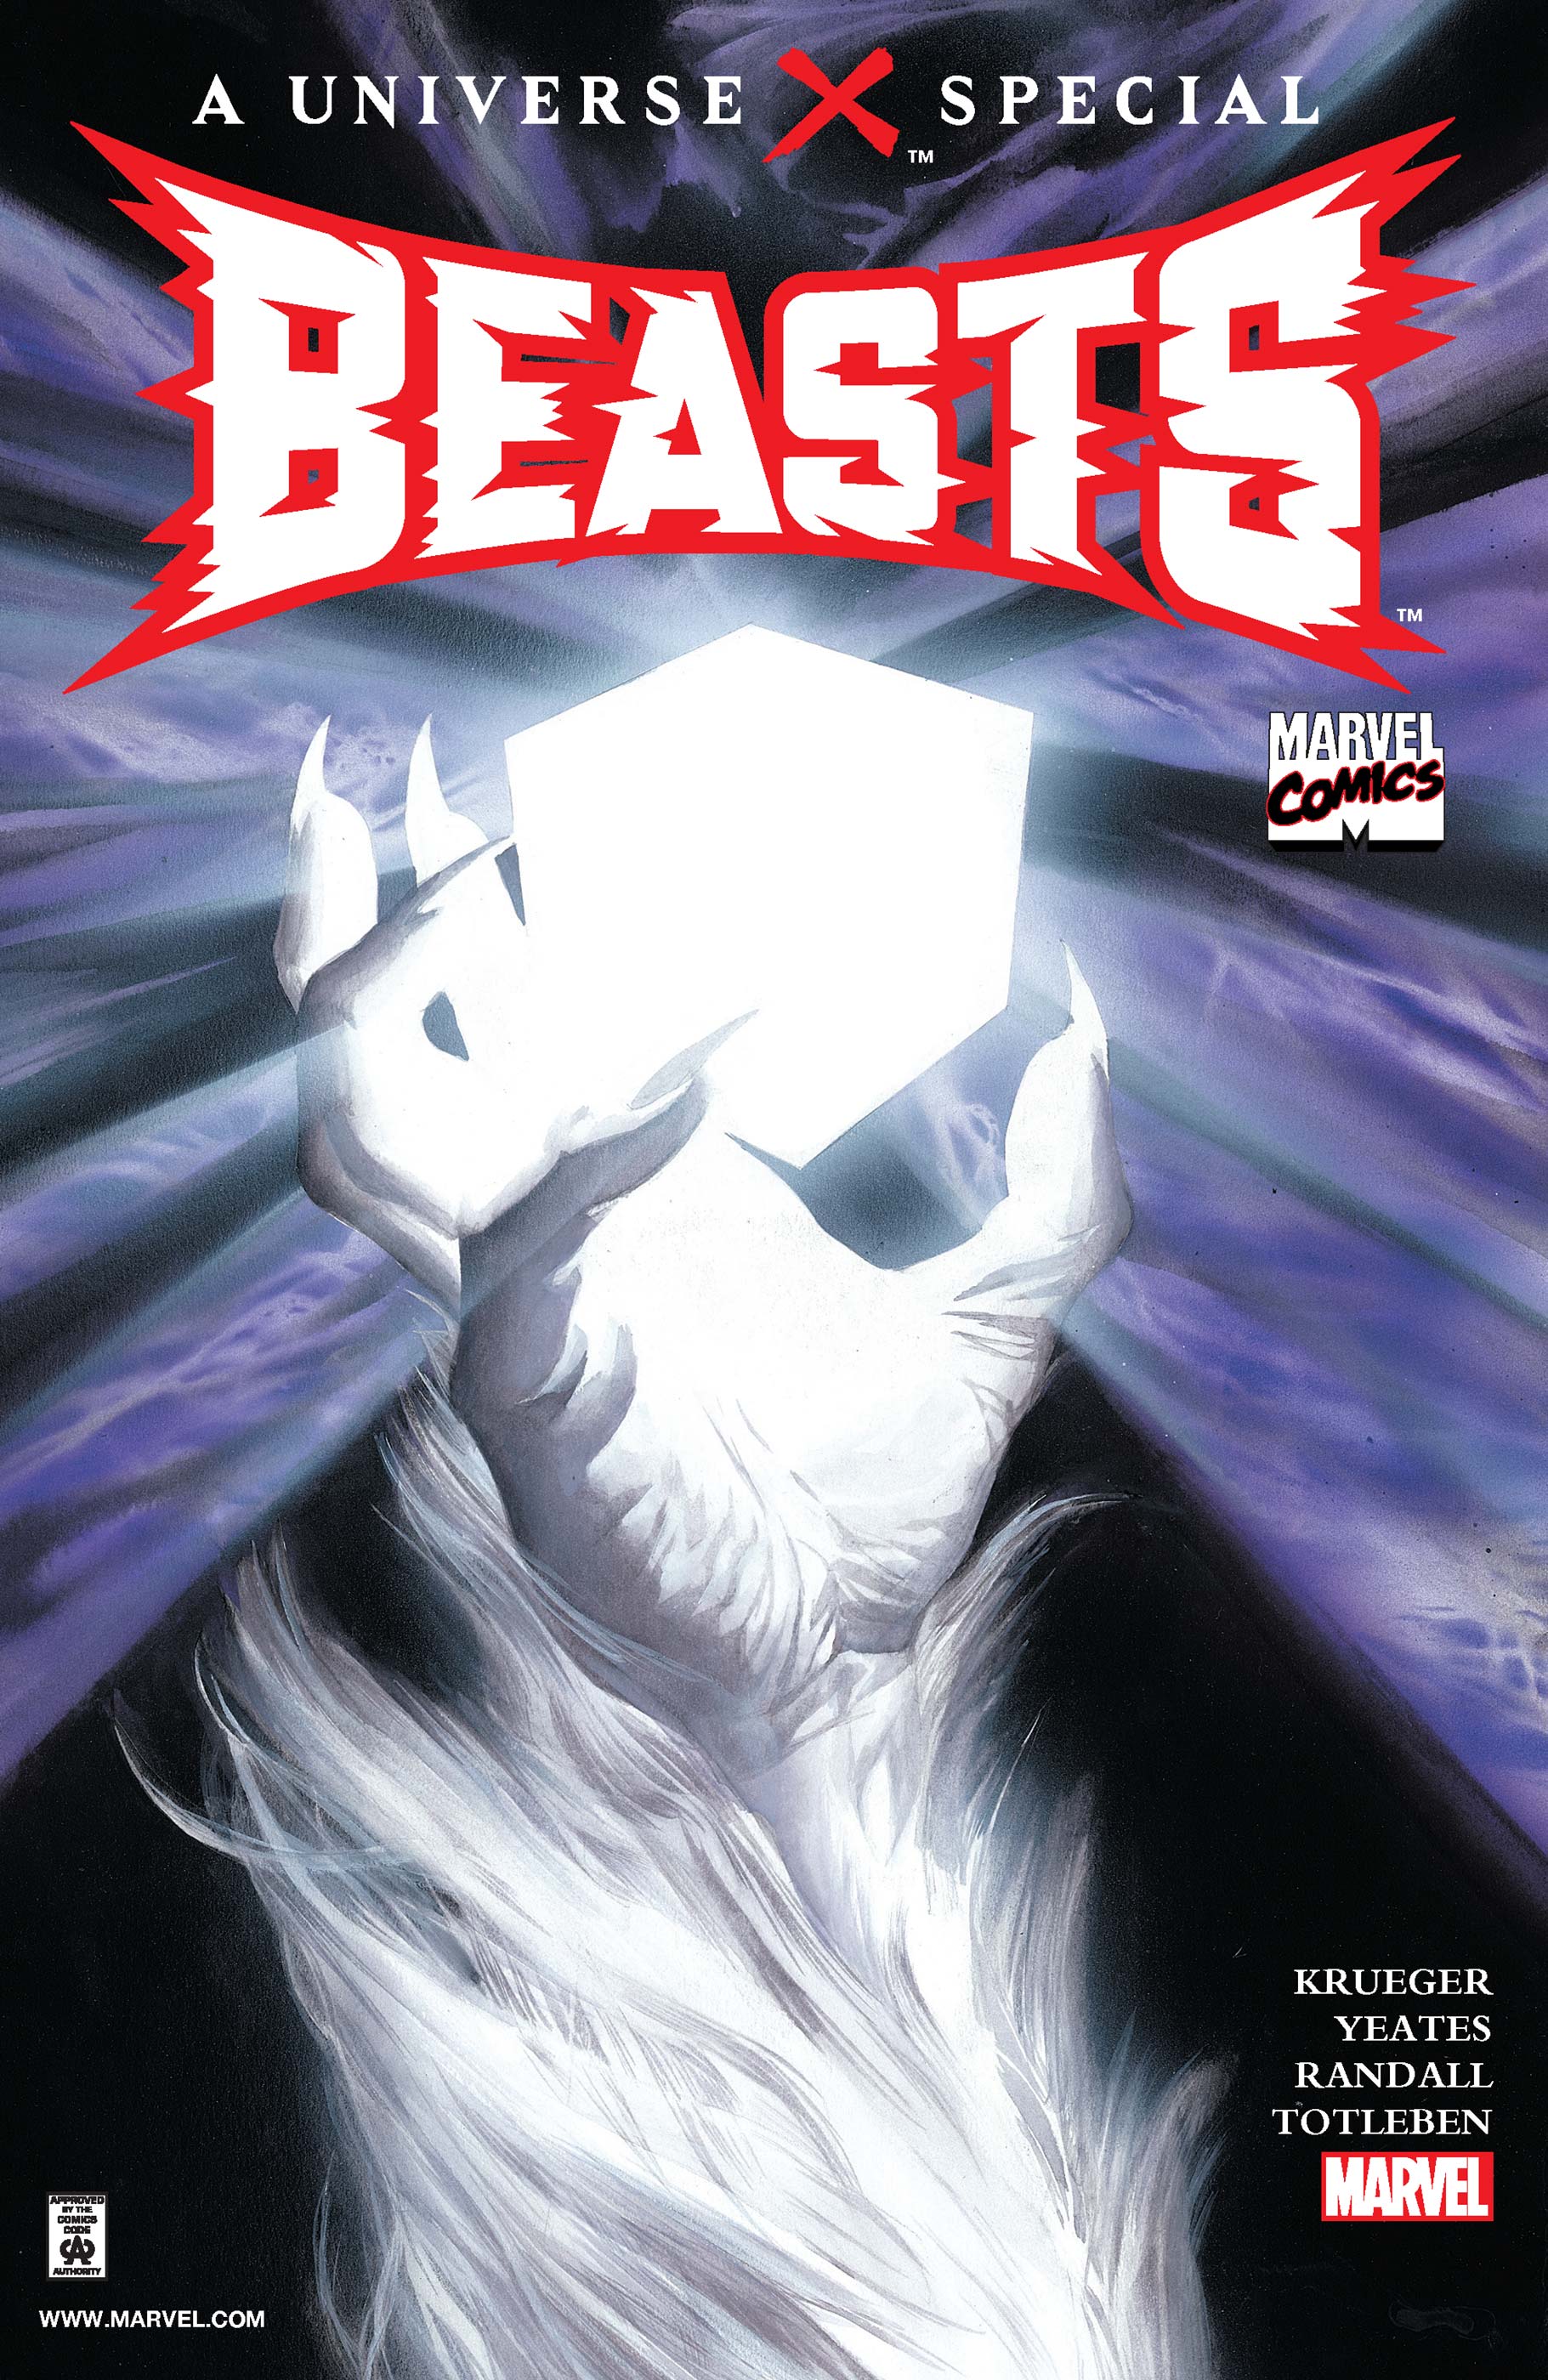 Universe X Special: Beasts (2001) #1